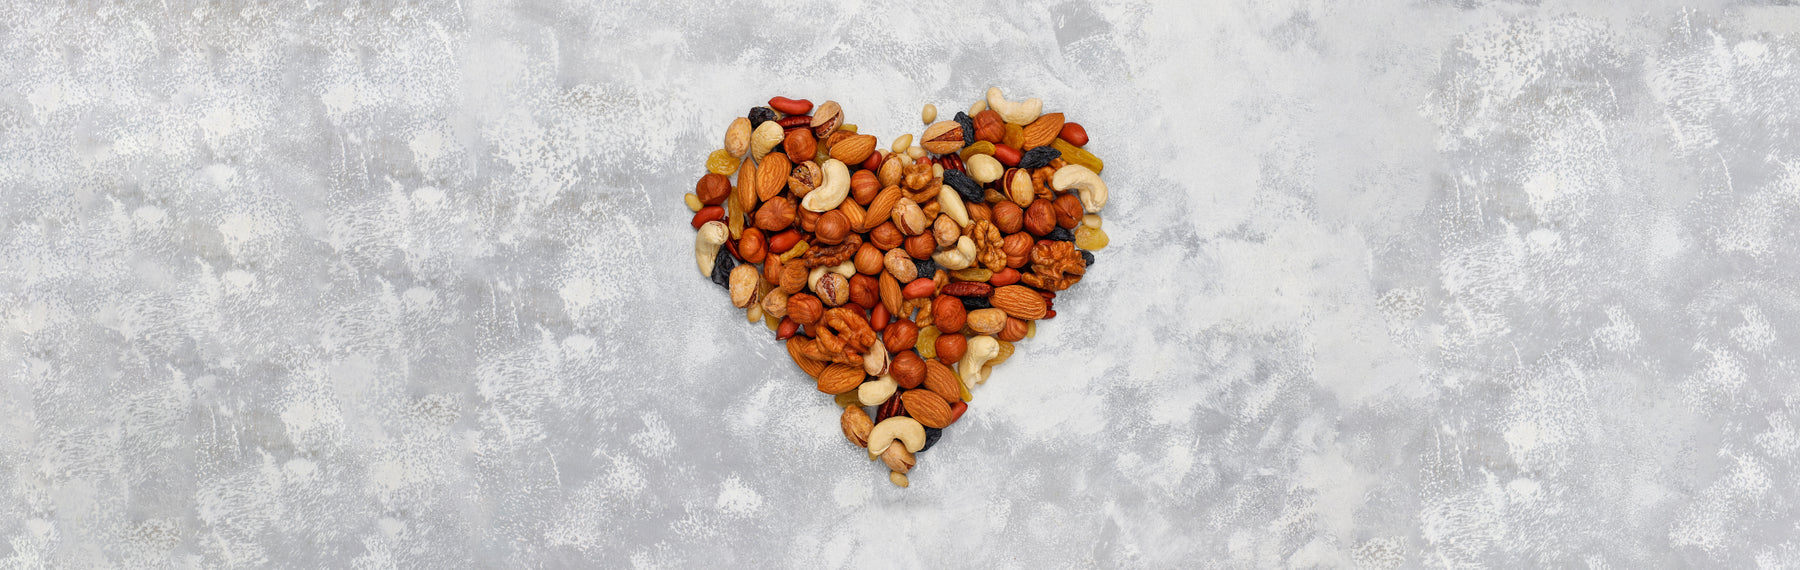 Nuts and your heart: A good part in a healthy diet - Sorichorganics